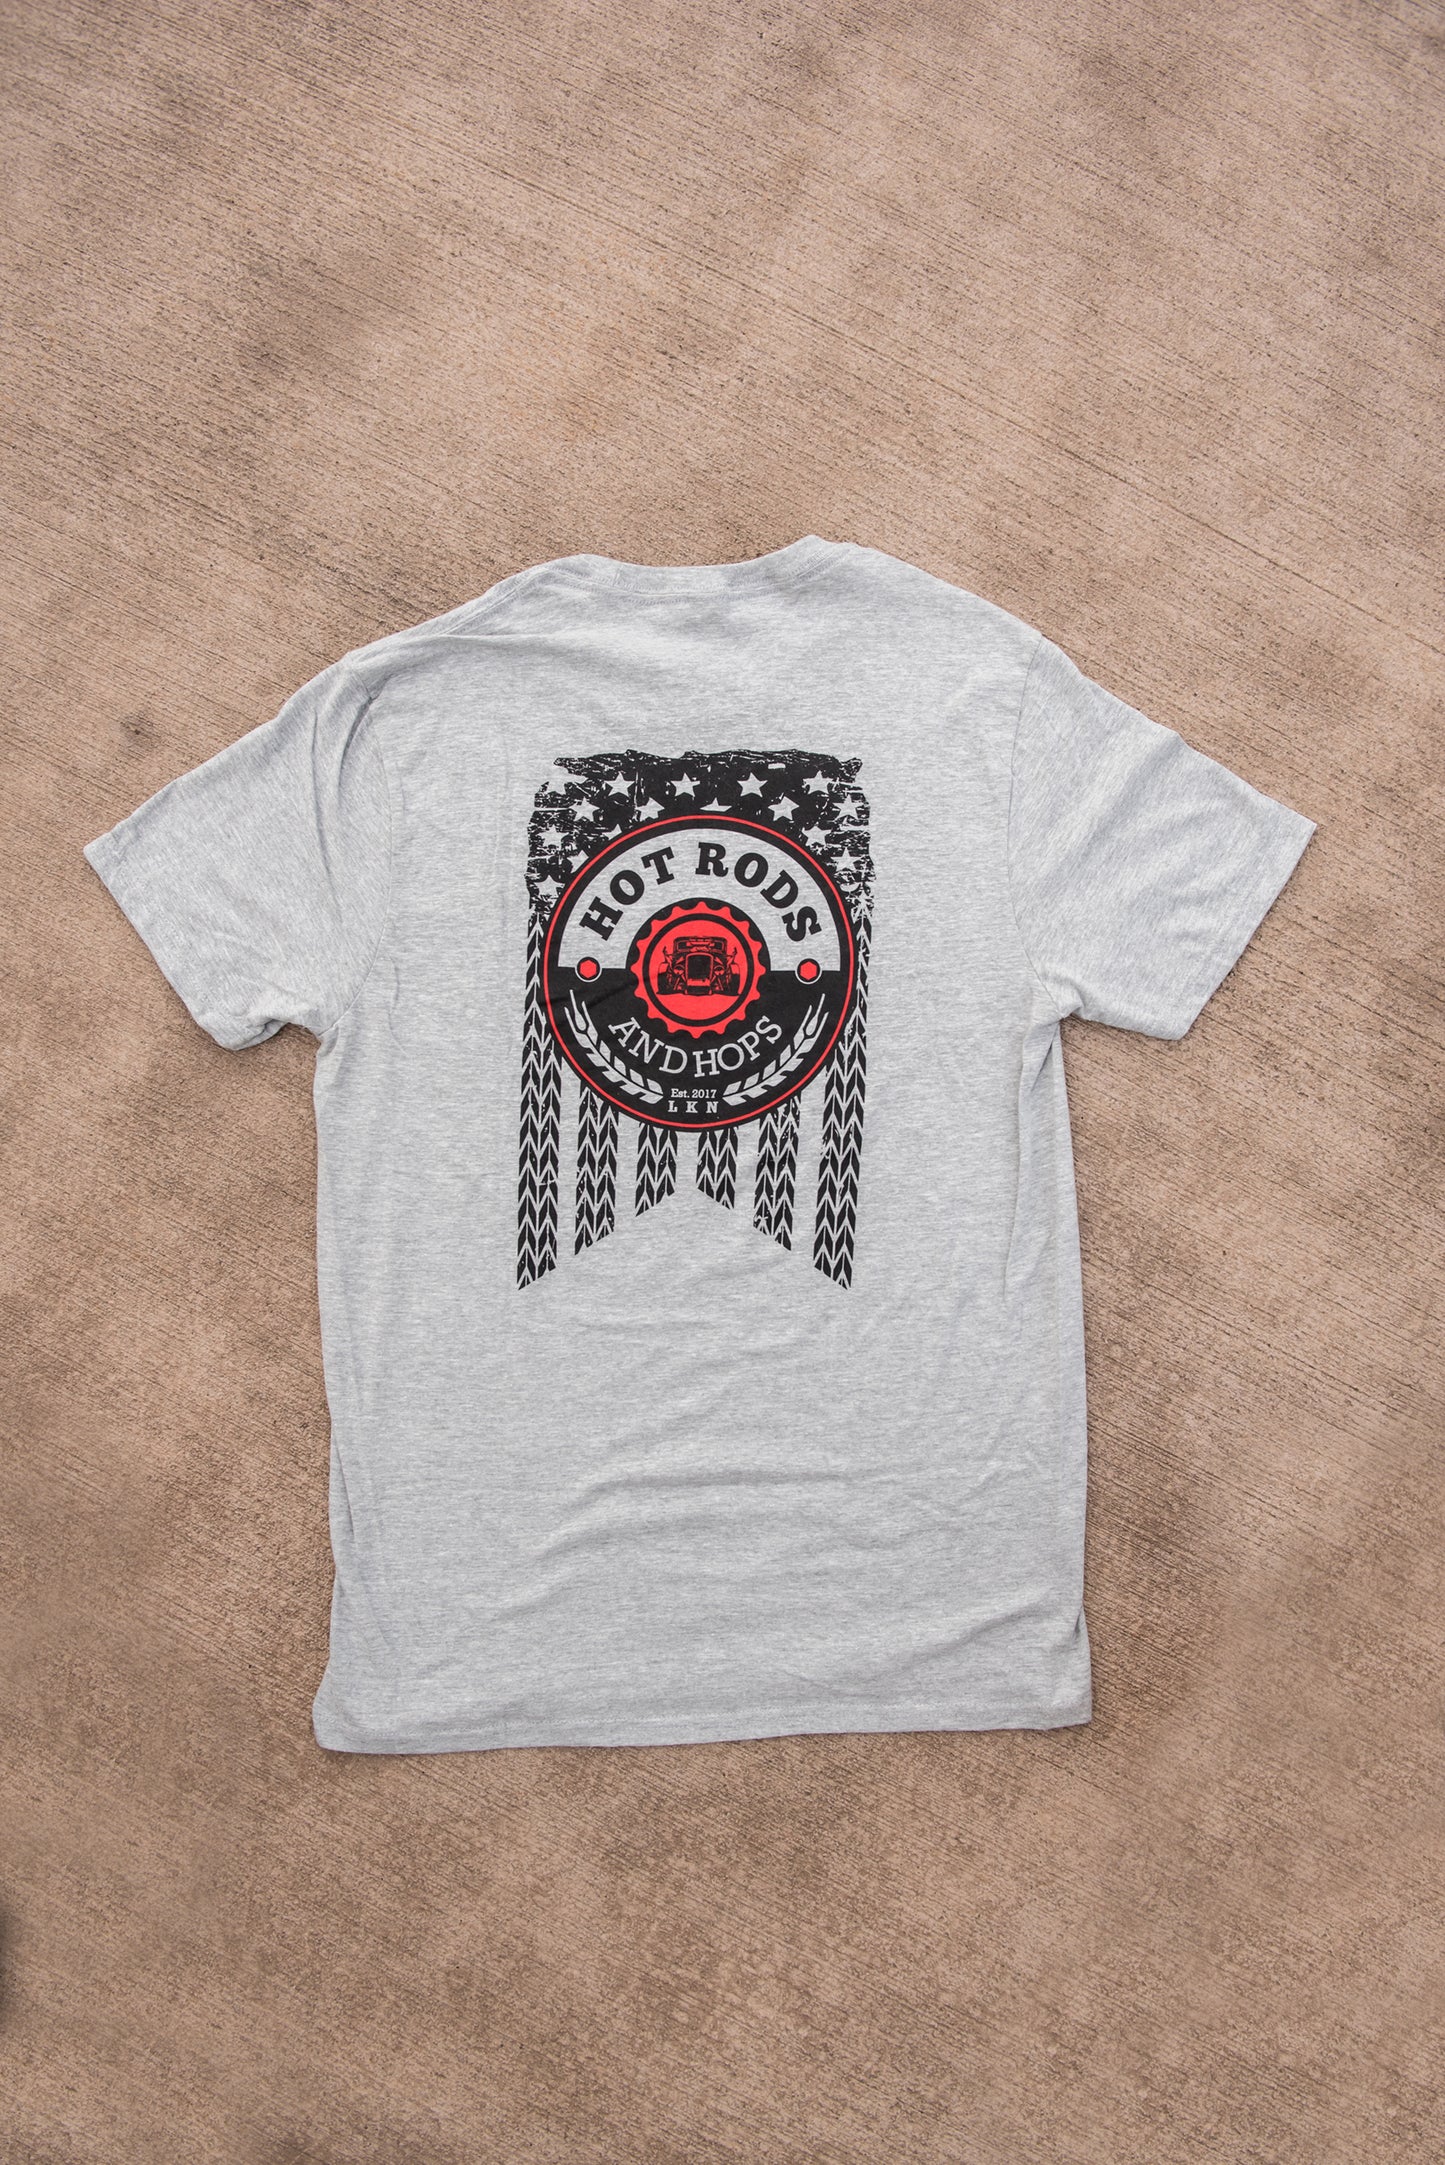 Hot Rod and Hops T-shirt